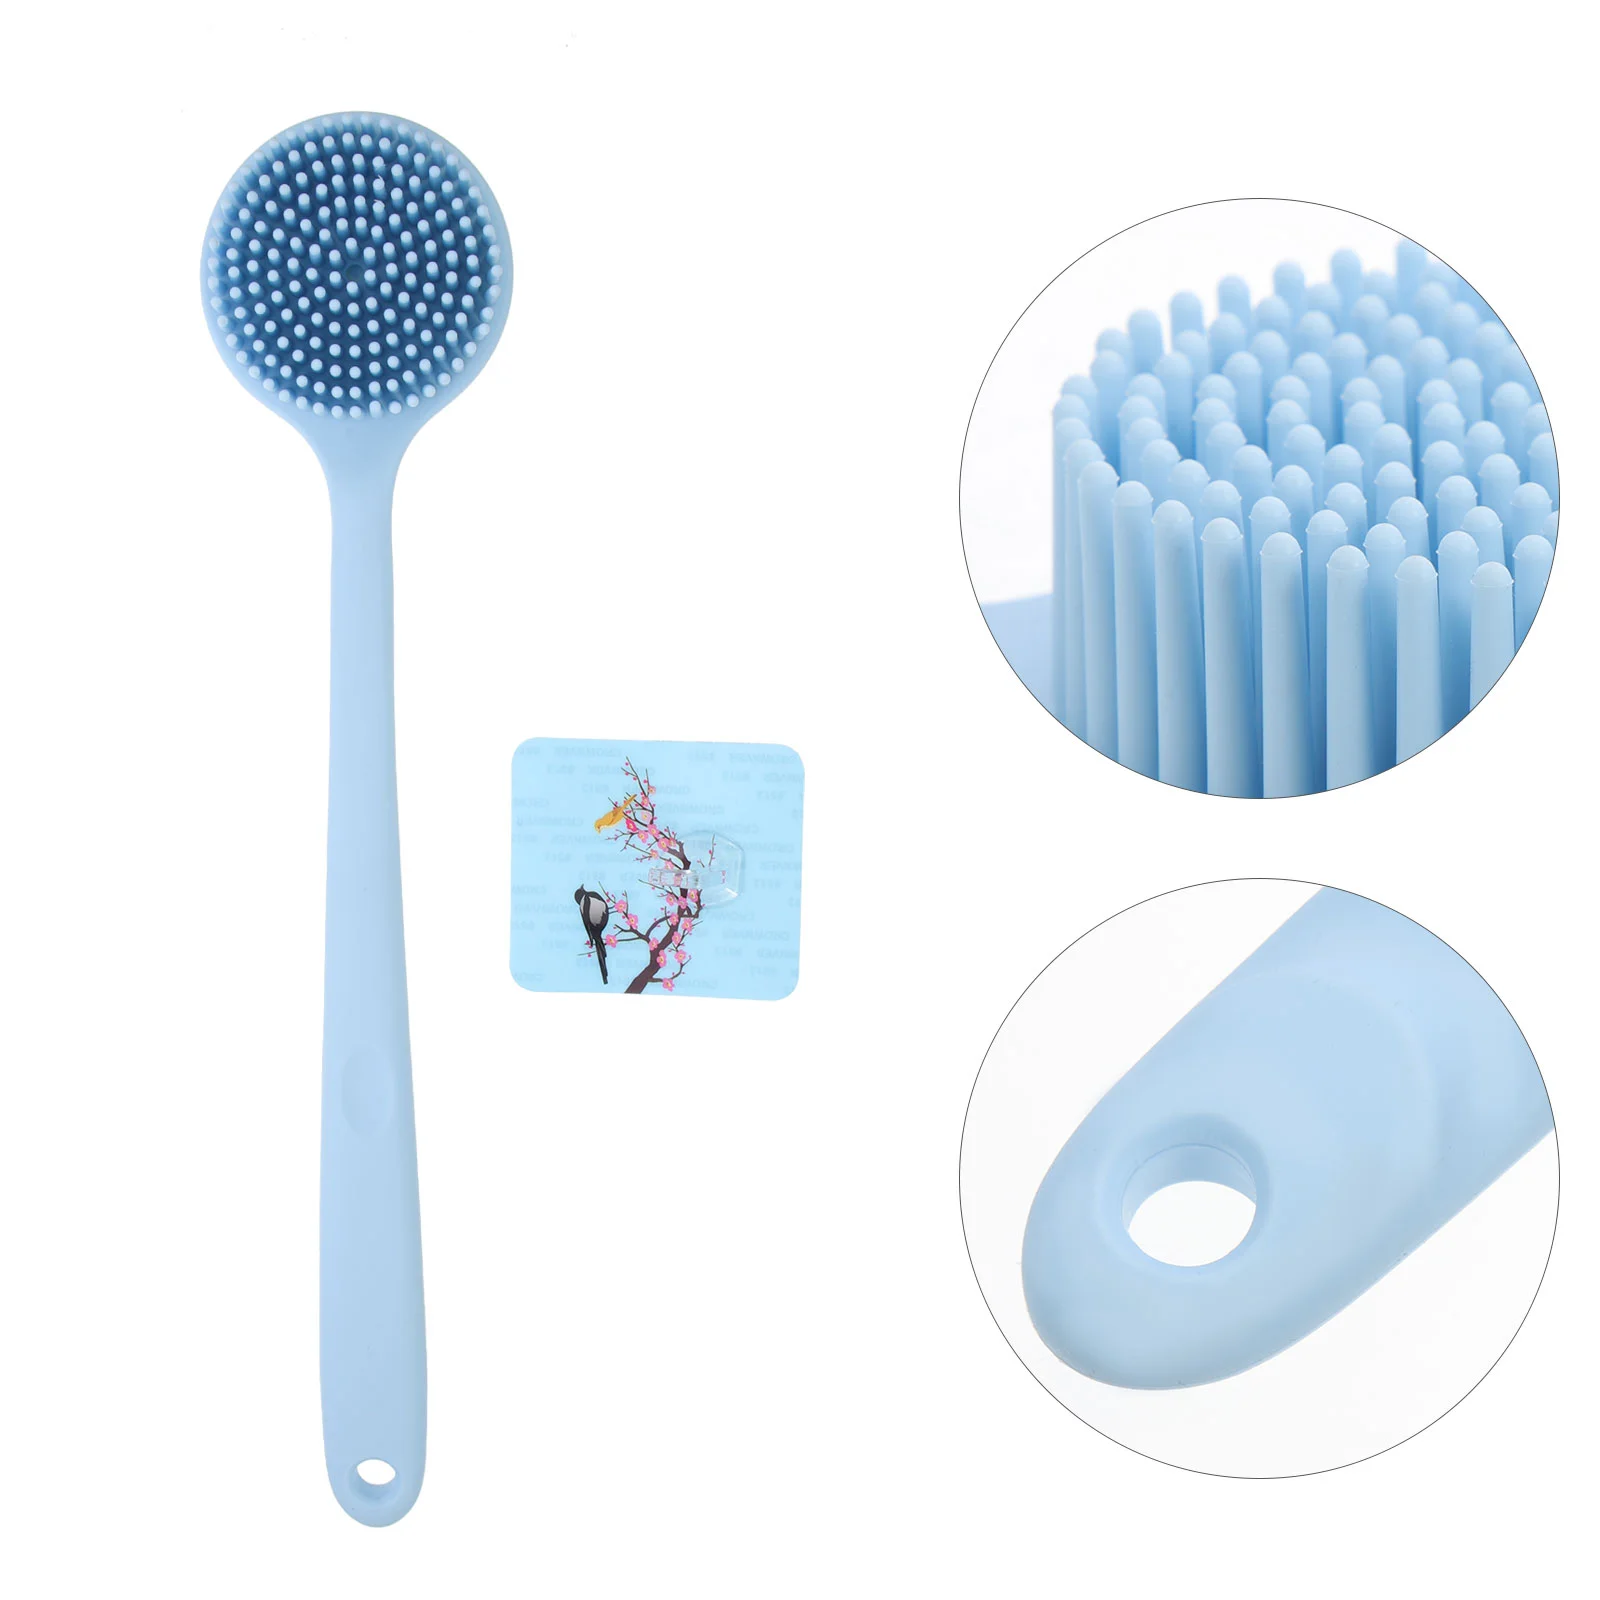 

Brush Body Scrubber Shower Bath Cleansing Silicone Exfoliating Handle Cleaning Spa Sponge Handled Scrub Hands Free Showering